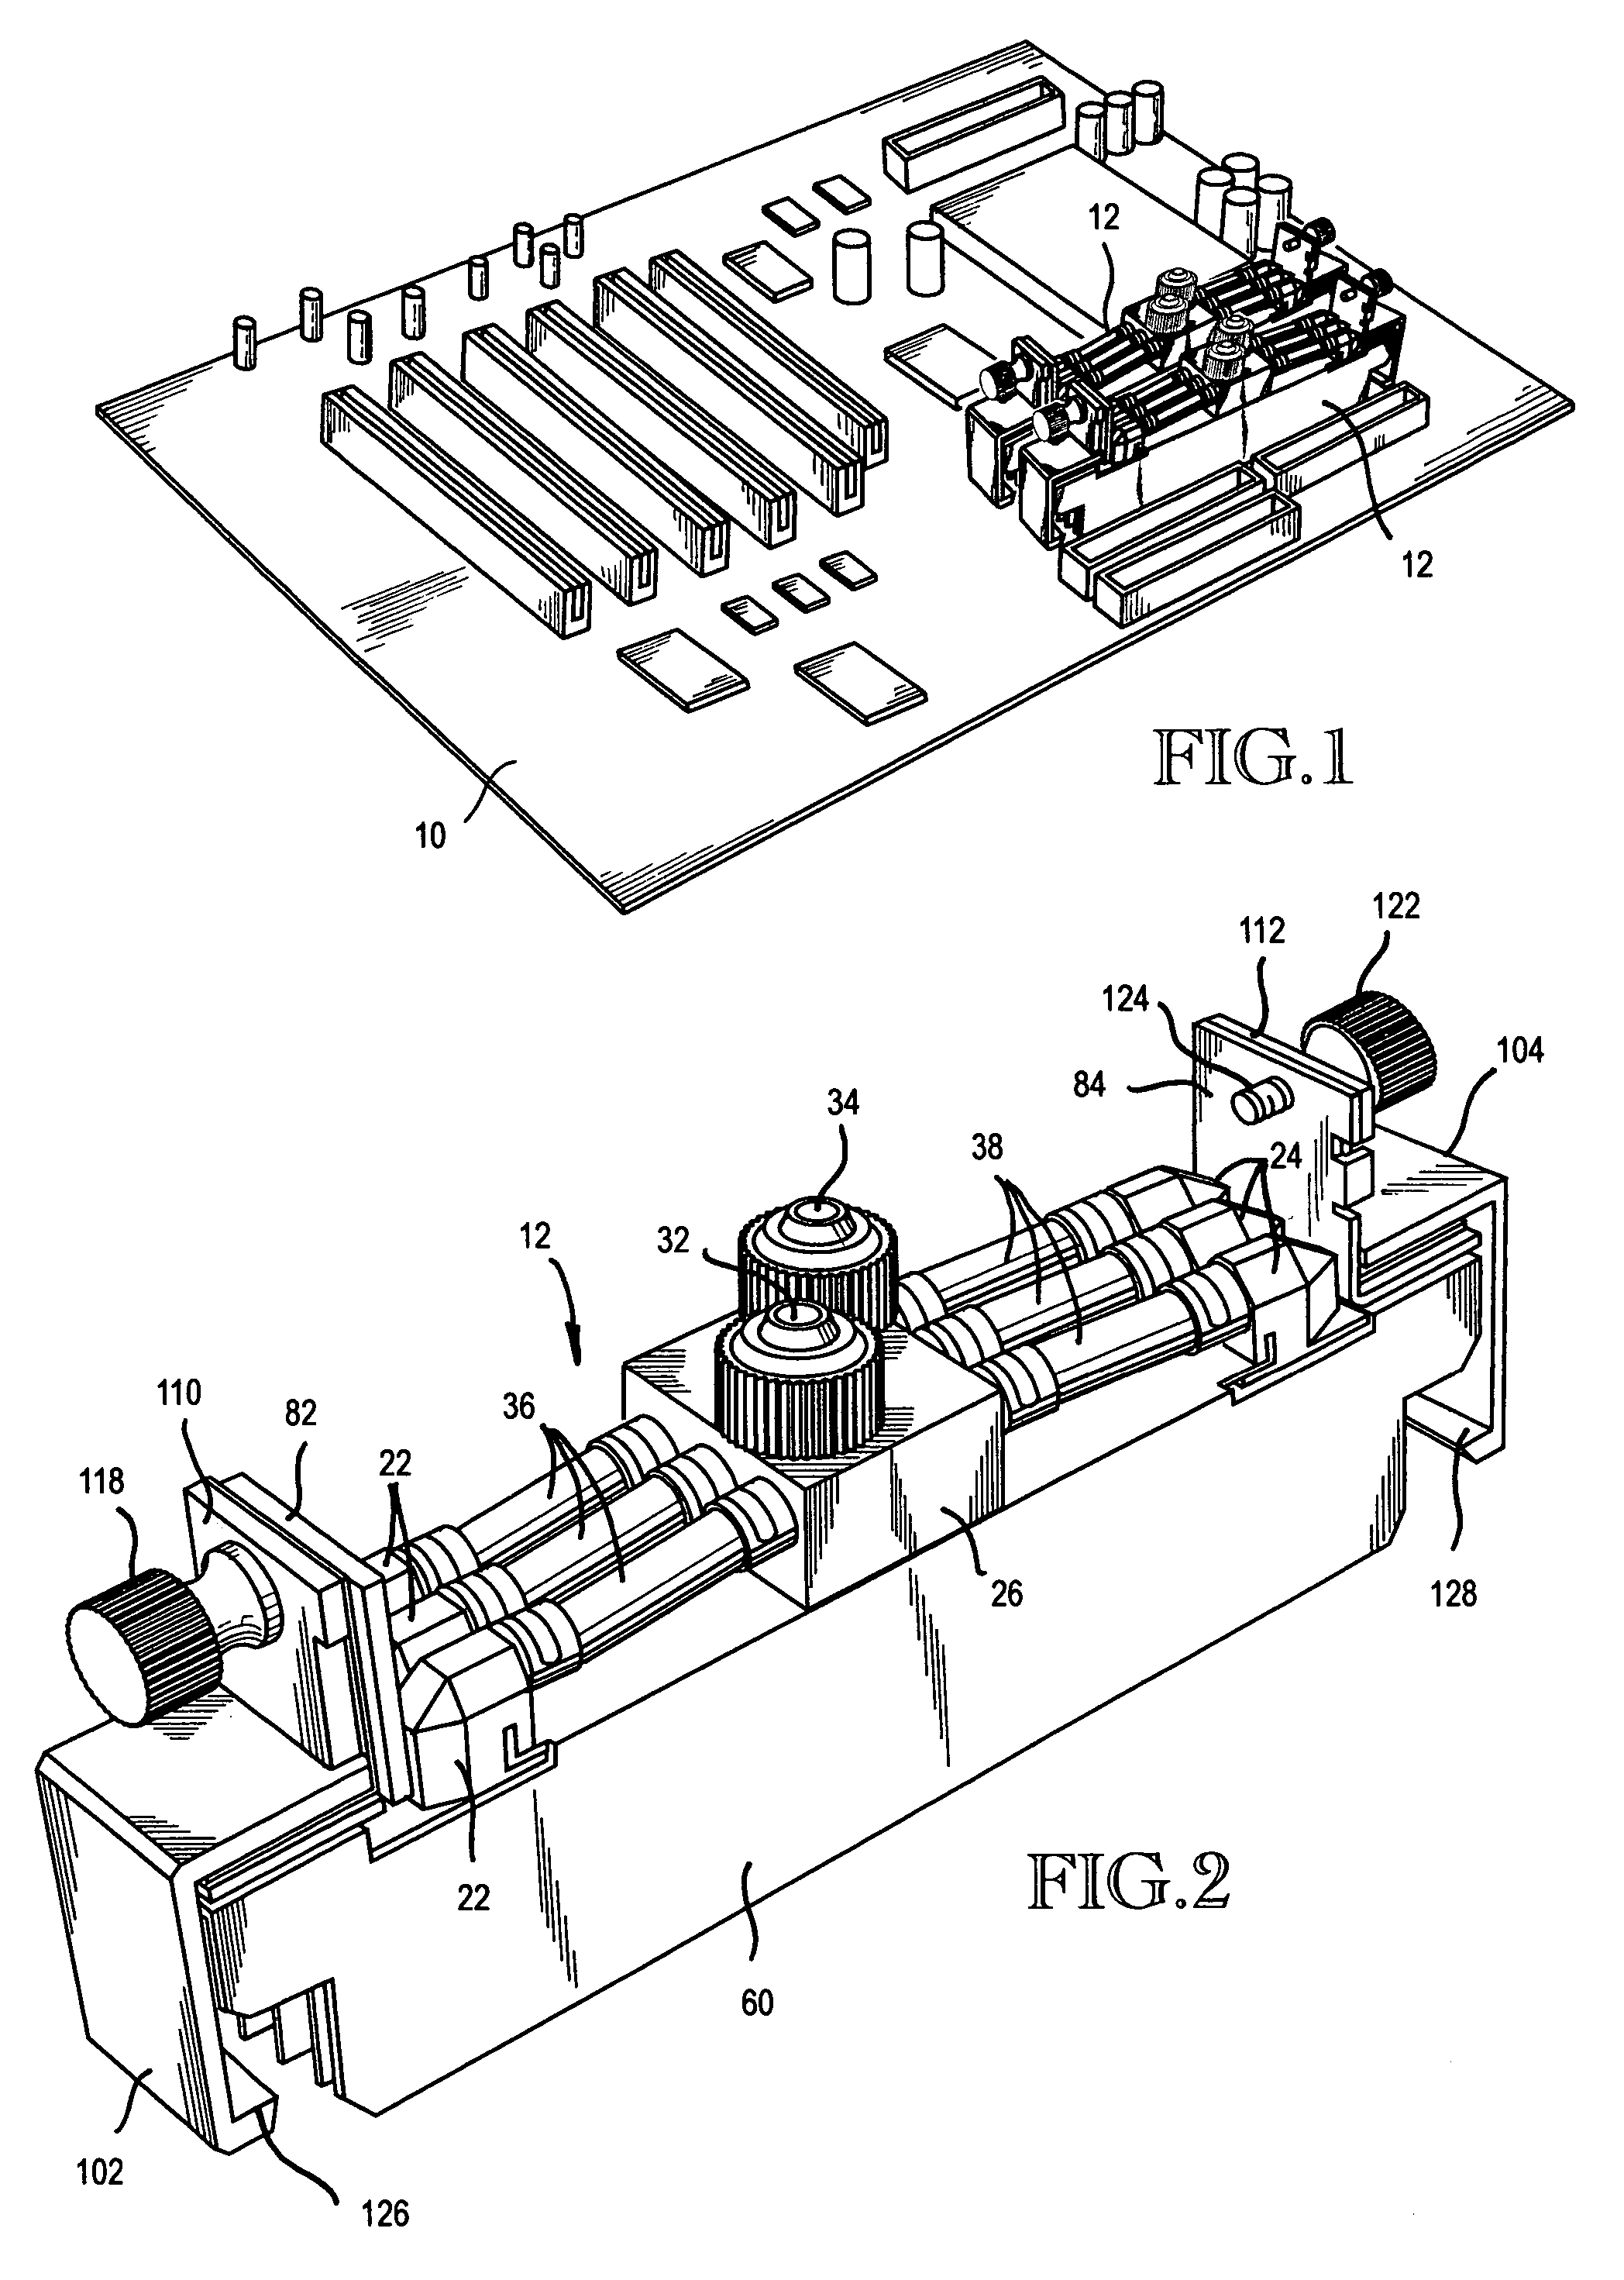 Cooling system for electronic devices